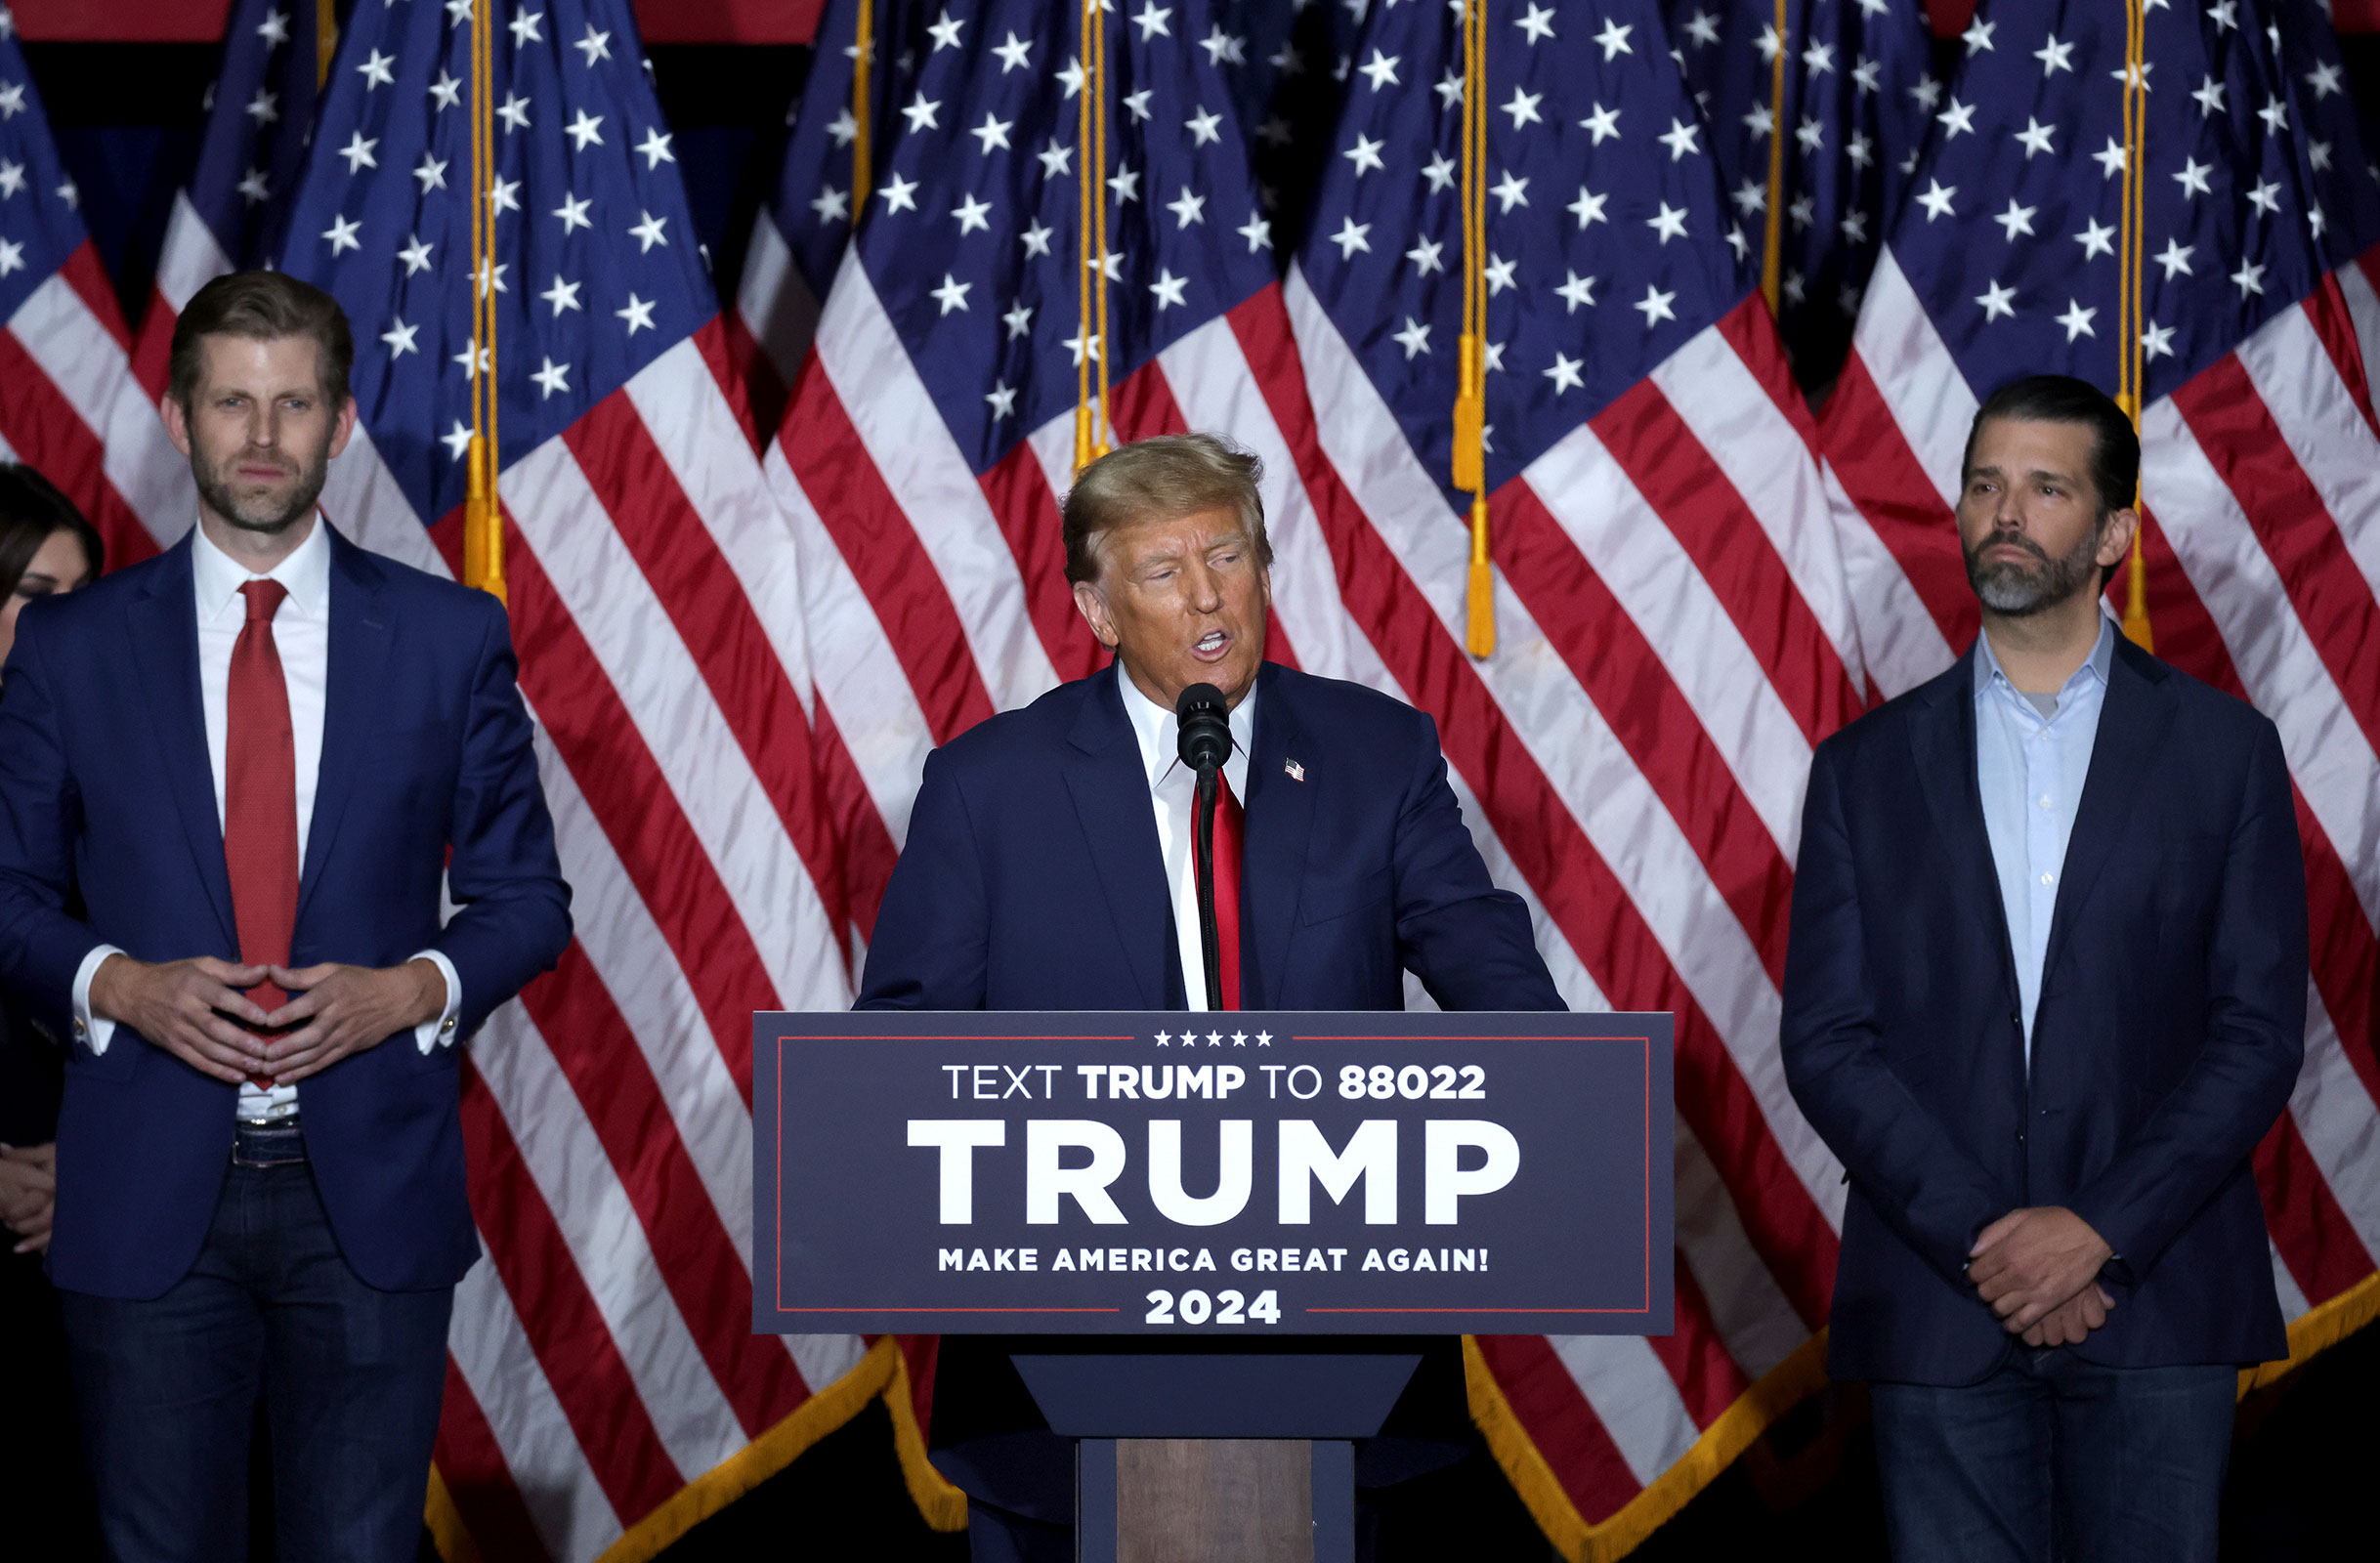 Former President Donald Trump speaks at his caucus night event, with sons Eric Trump and Donald Trump Jr. beside him, at the Iowa Events Center on January 15, in Des Moines, Iowa. 